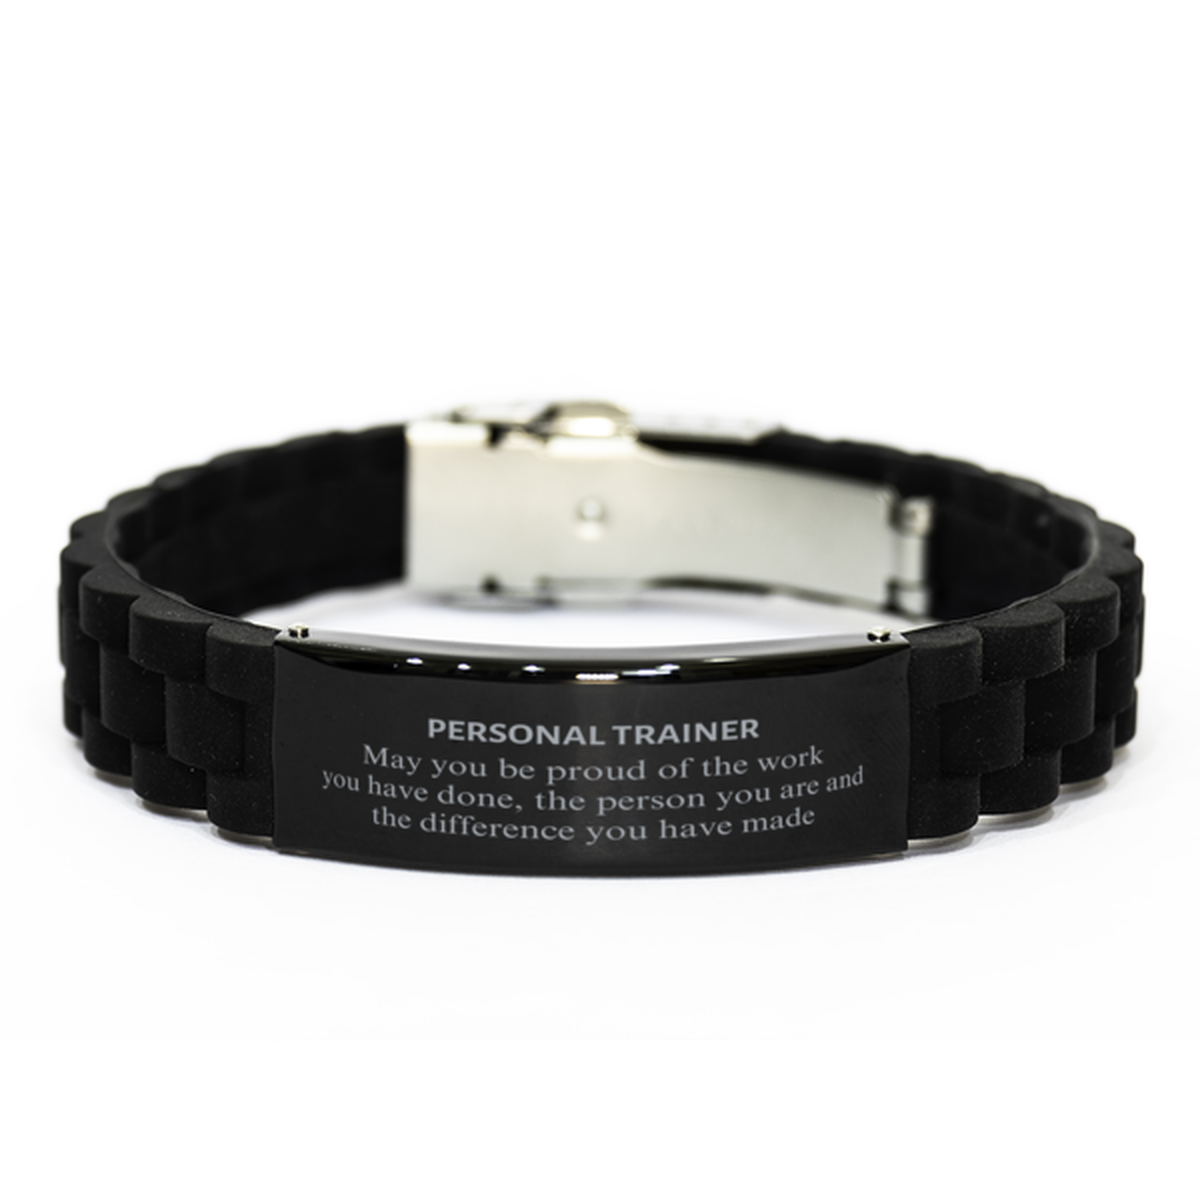 Personal Trainer May you be proud of the work you have done, Retirement Personal Trainer Black Glidelock Clasp Bracelet for Colleague Appreciation Gifts Amazing for Personal Trainer